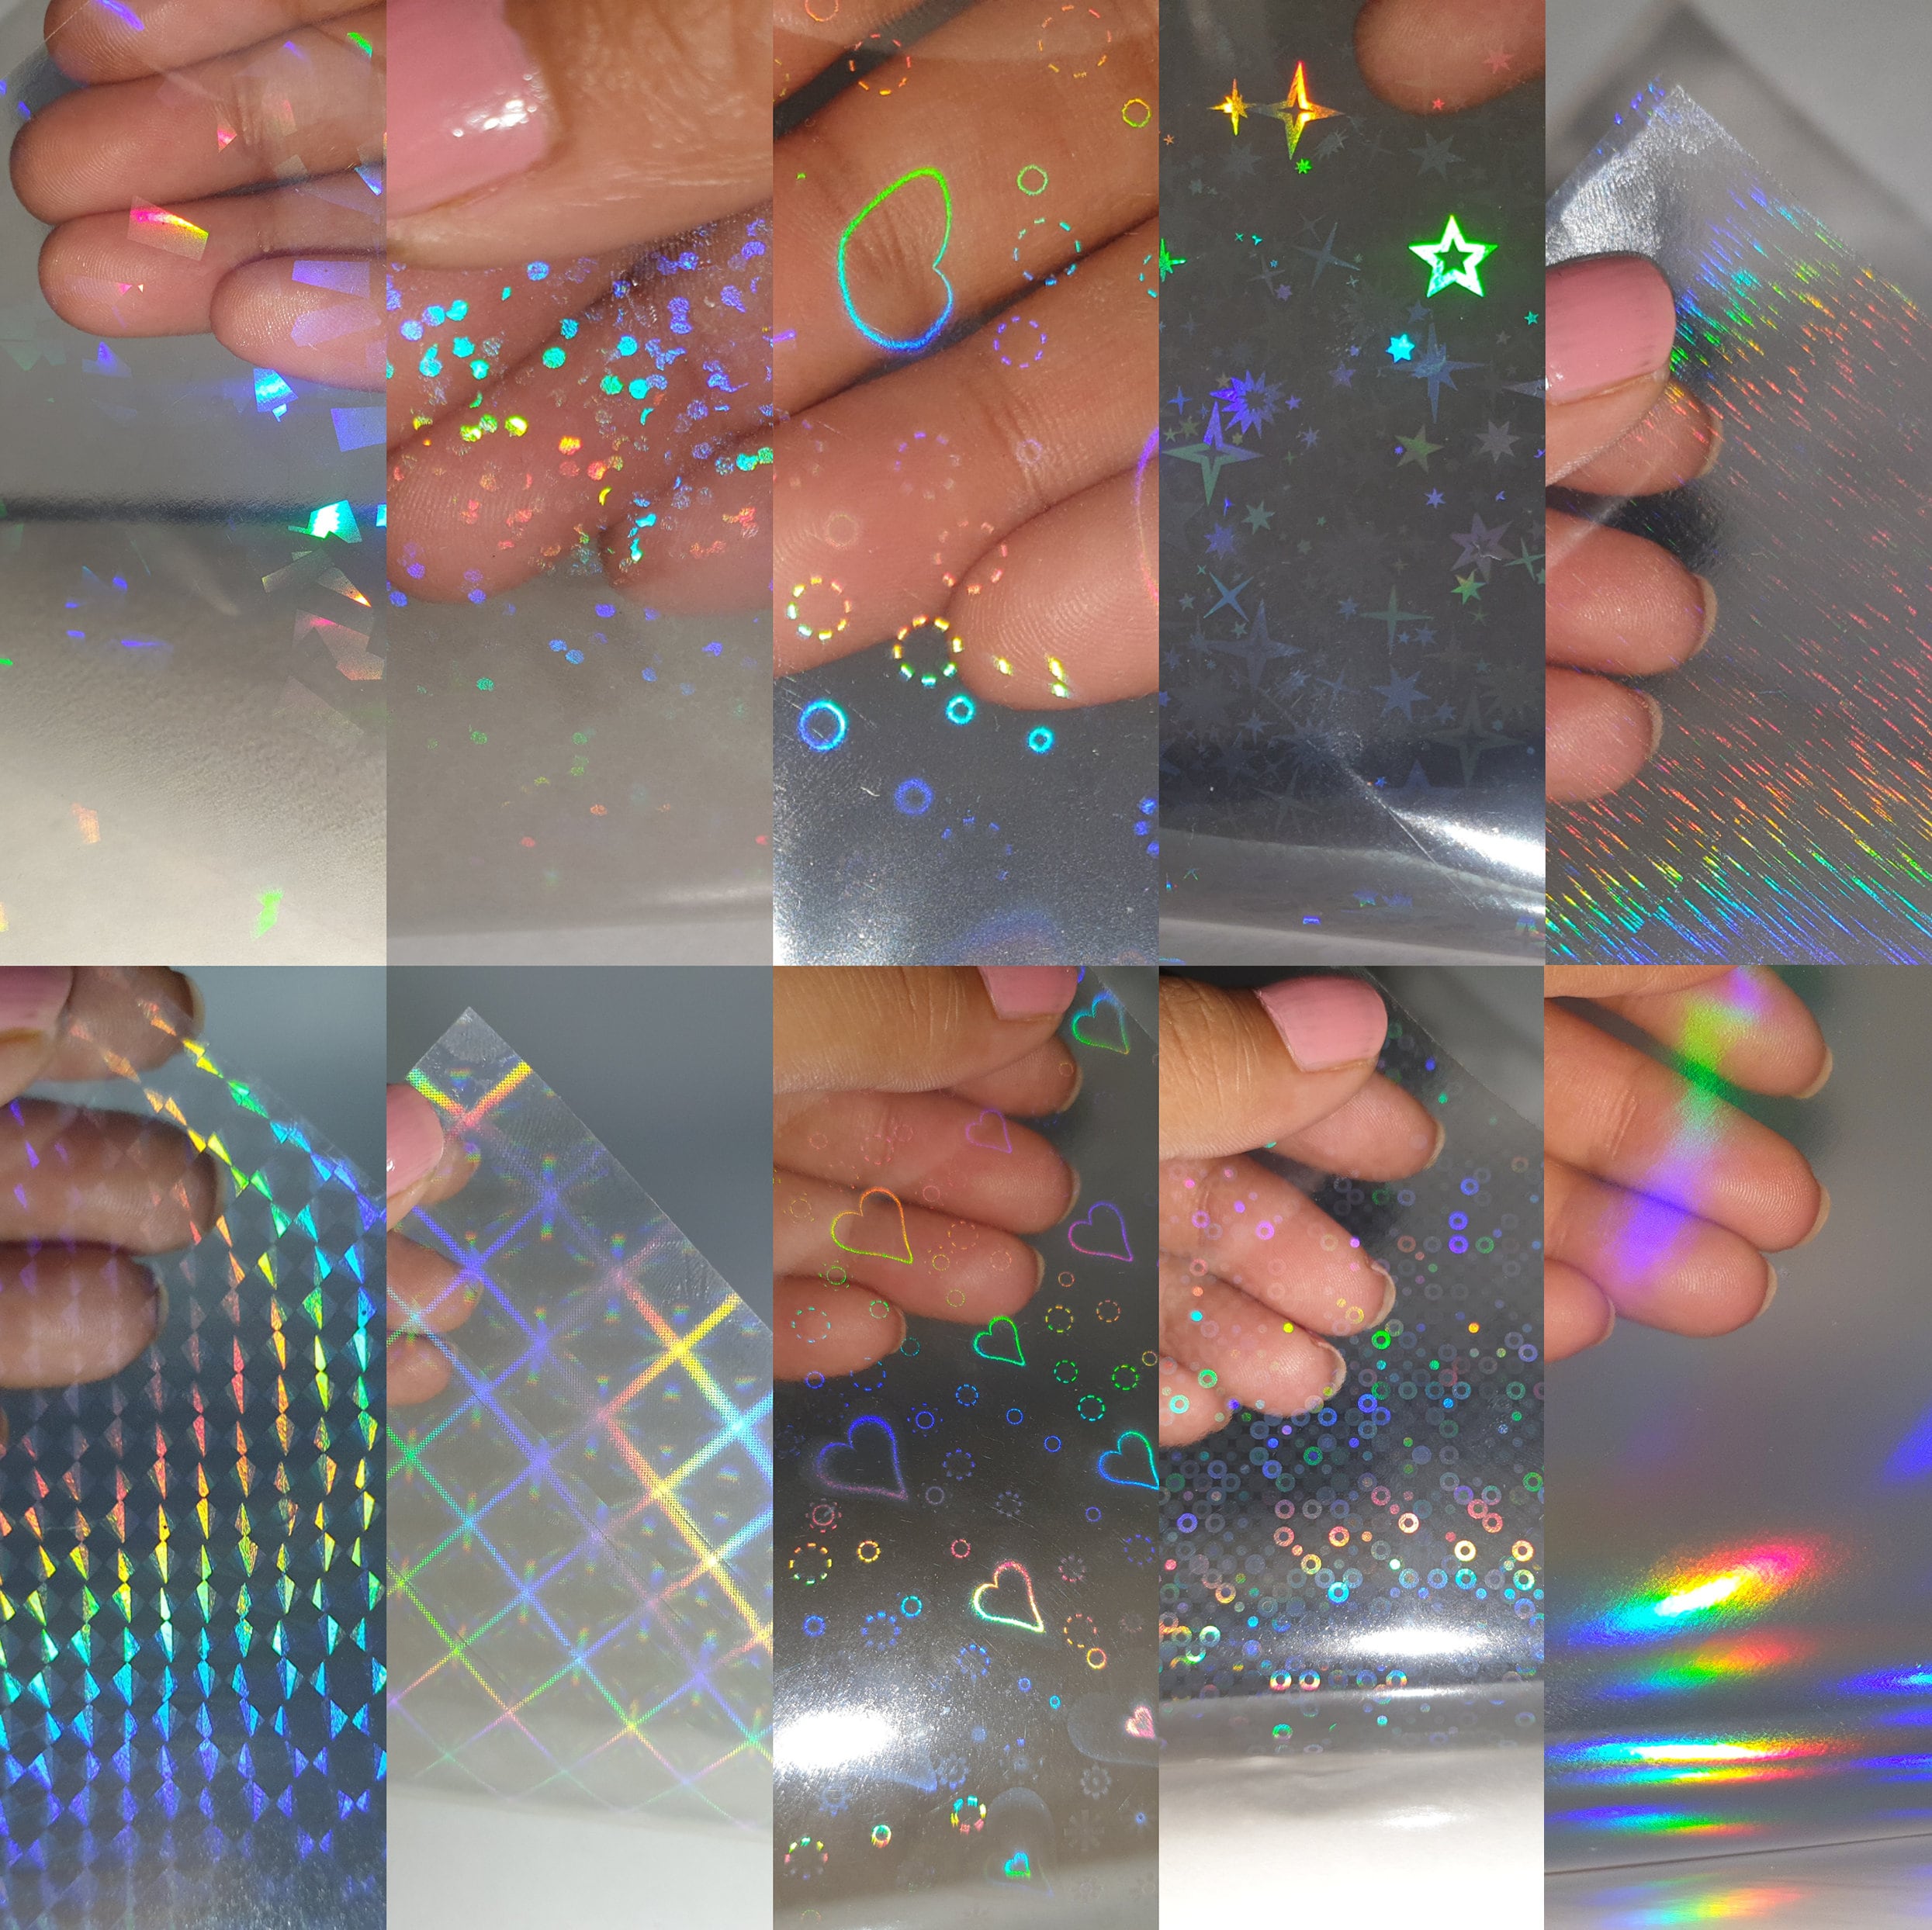 Hsv Self-Adhesive 15 Colors Holographic Advertising Film Stickers